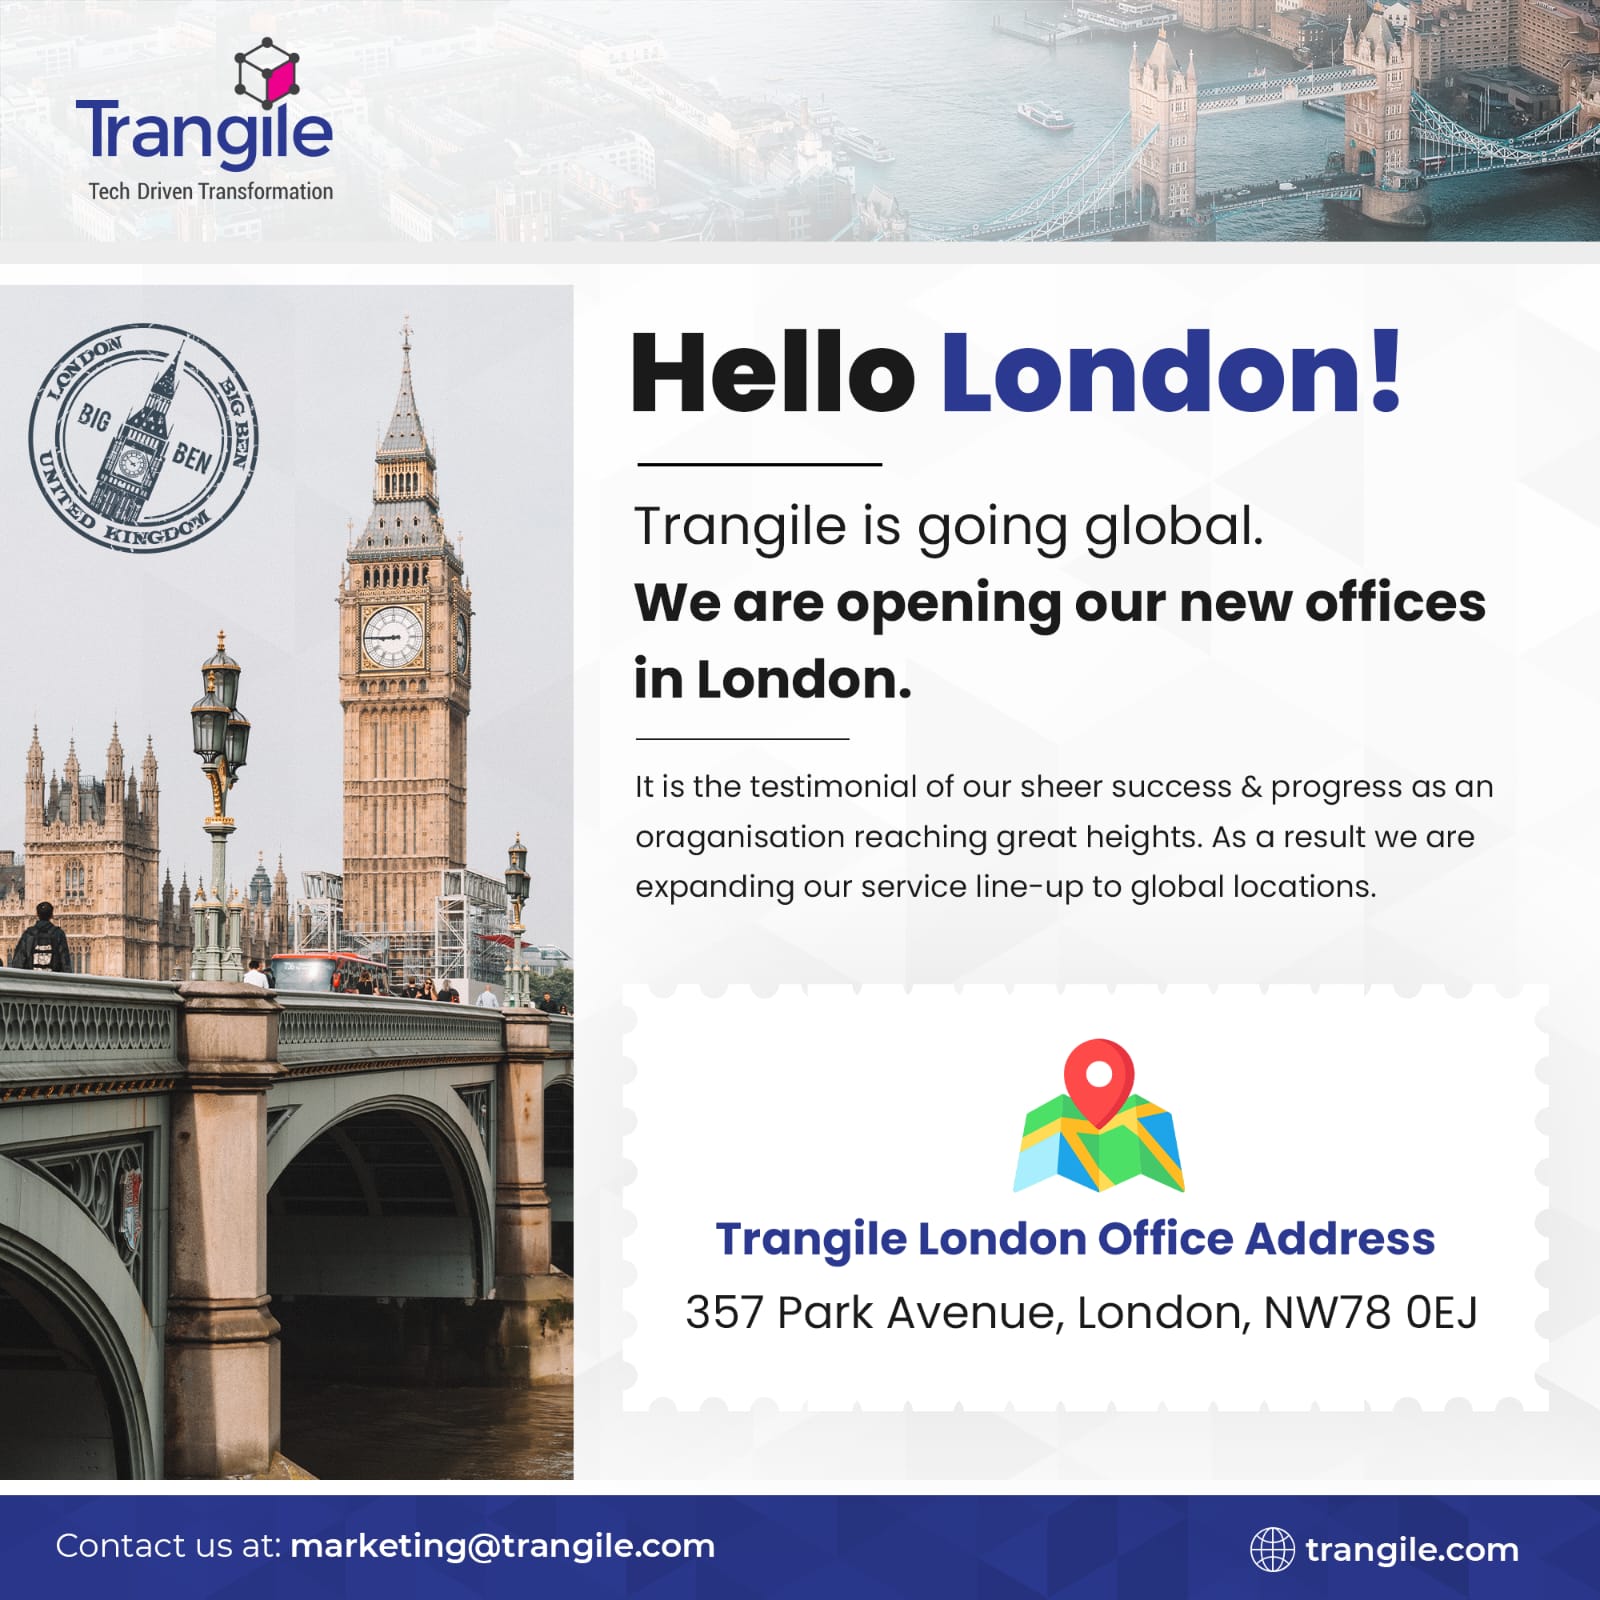 Trangile arrived in London now!!!!!!